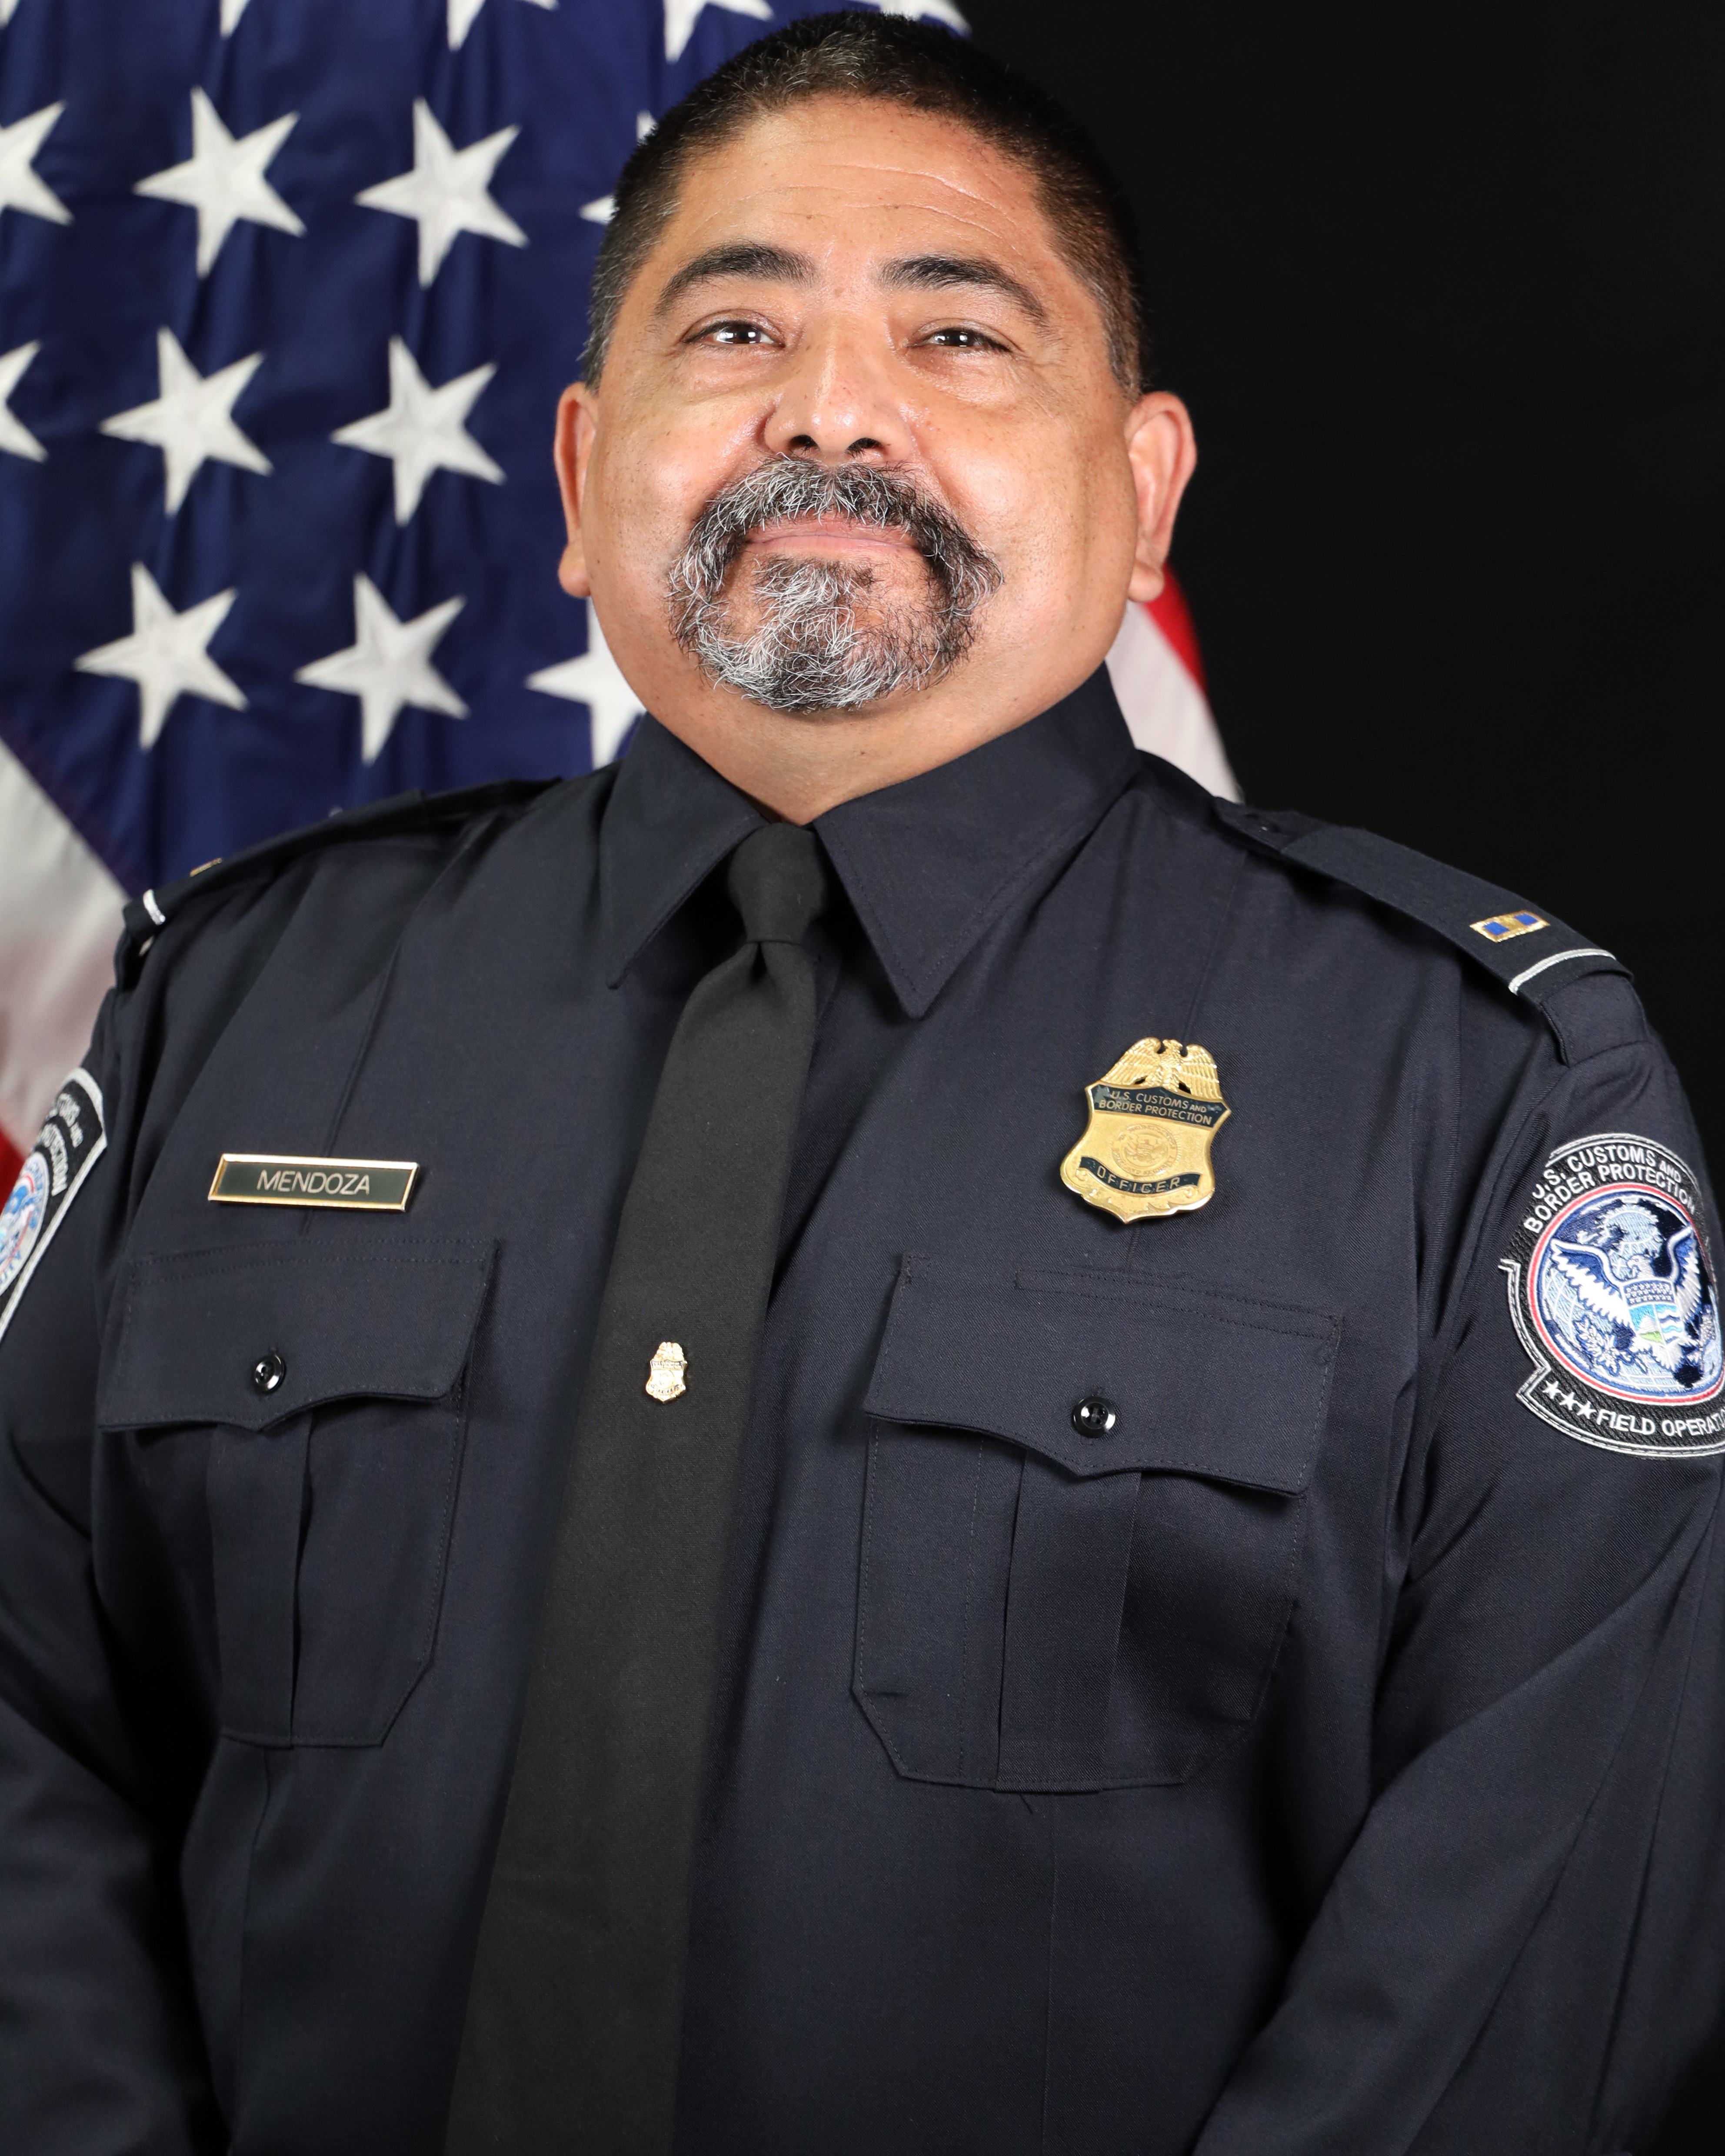 Officer Carlos C. Mendoza | United States Department of Homeland Security - Customs and Border Protection - Office of Field Operations, U.S. Government